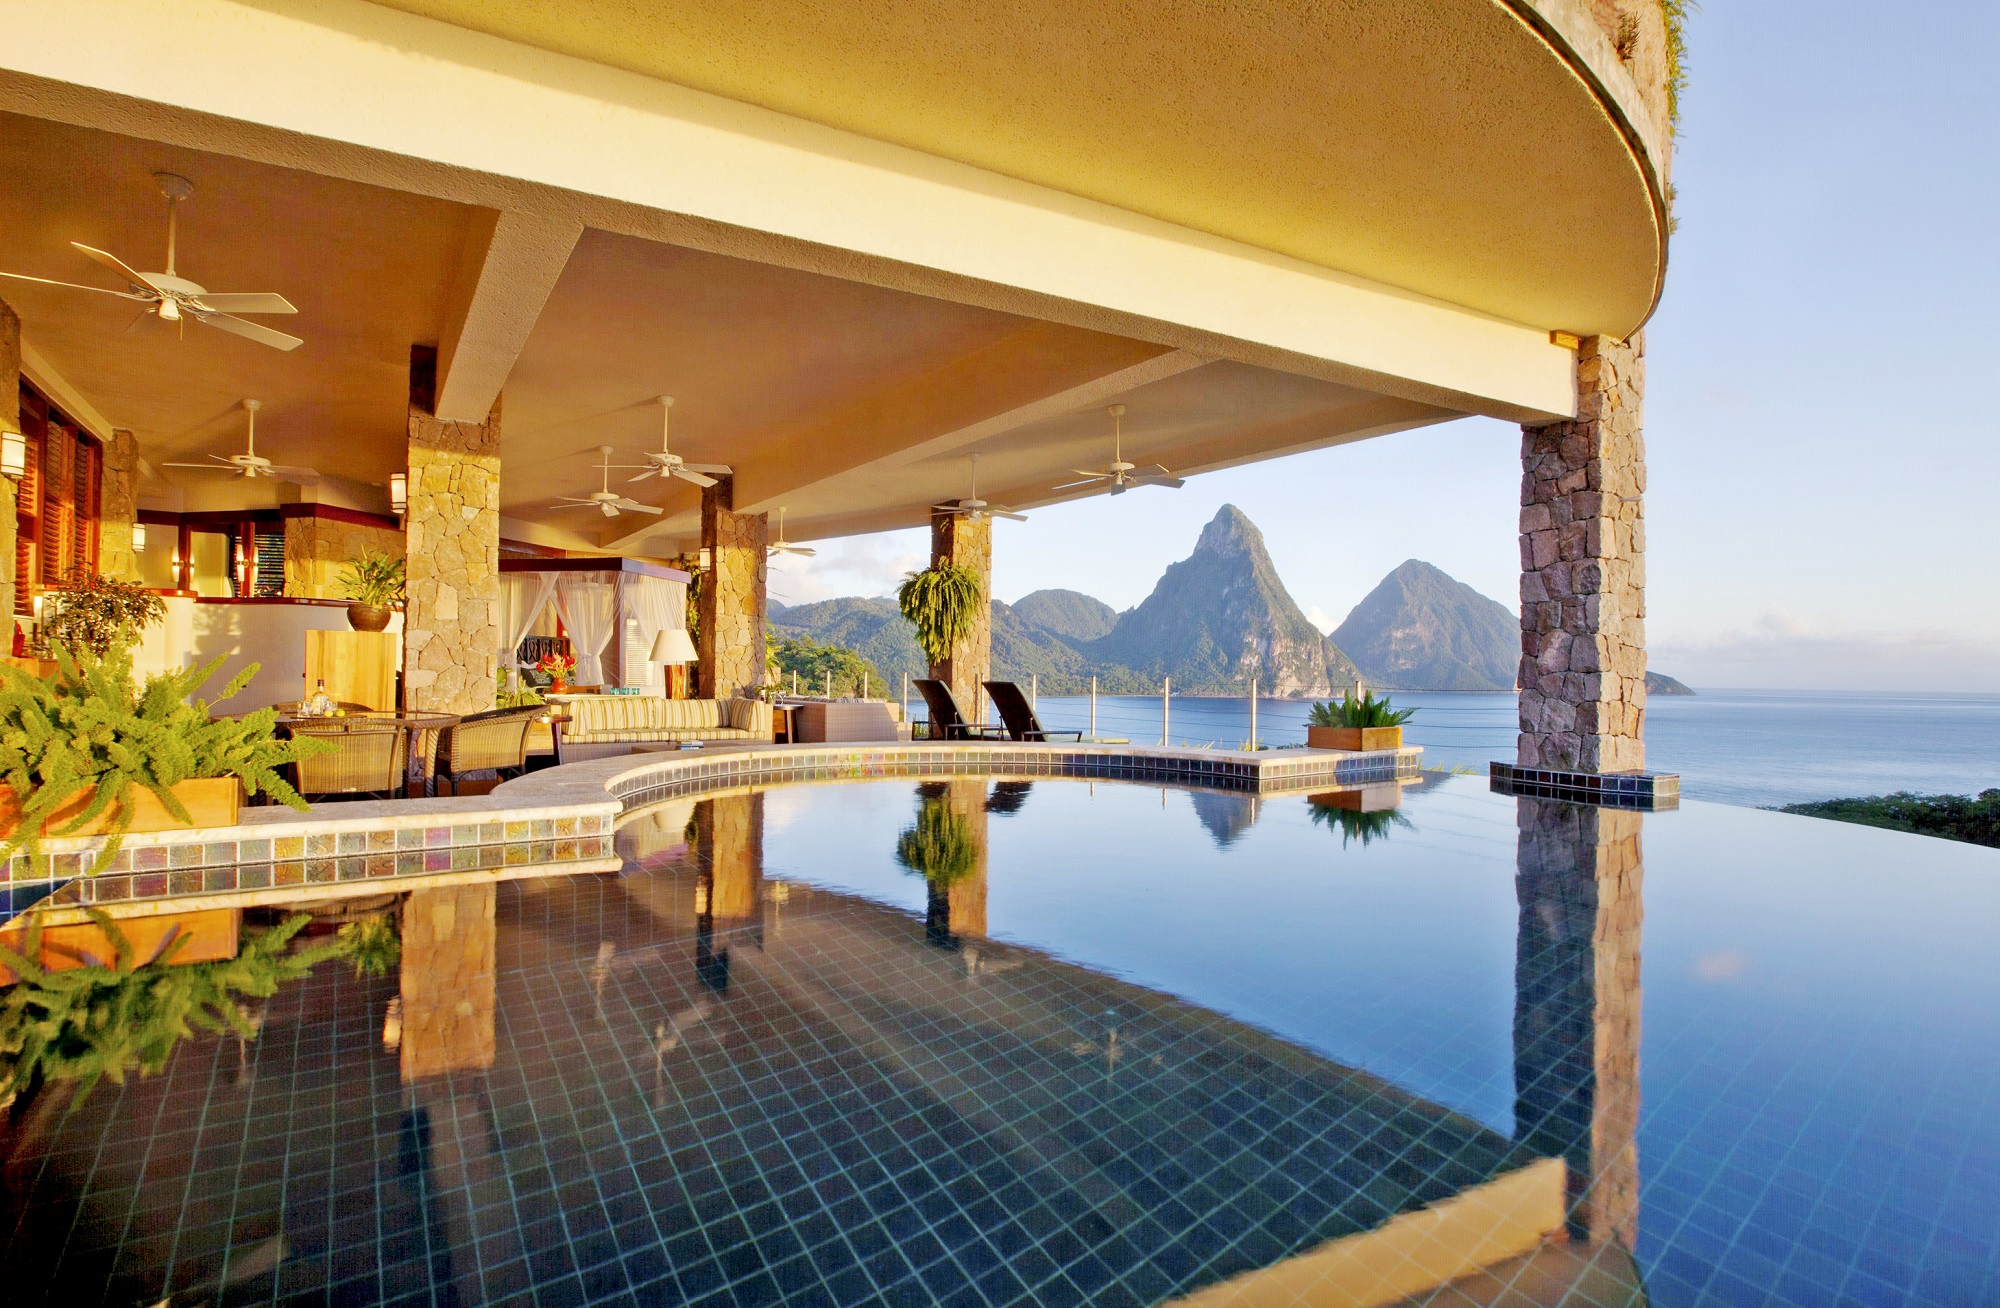 BBC Two’s Amazing Hotels show reveals the hard work that goes into creating dream stays at St Lucia’s Jade Mountain resort.